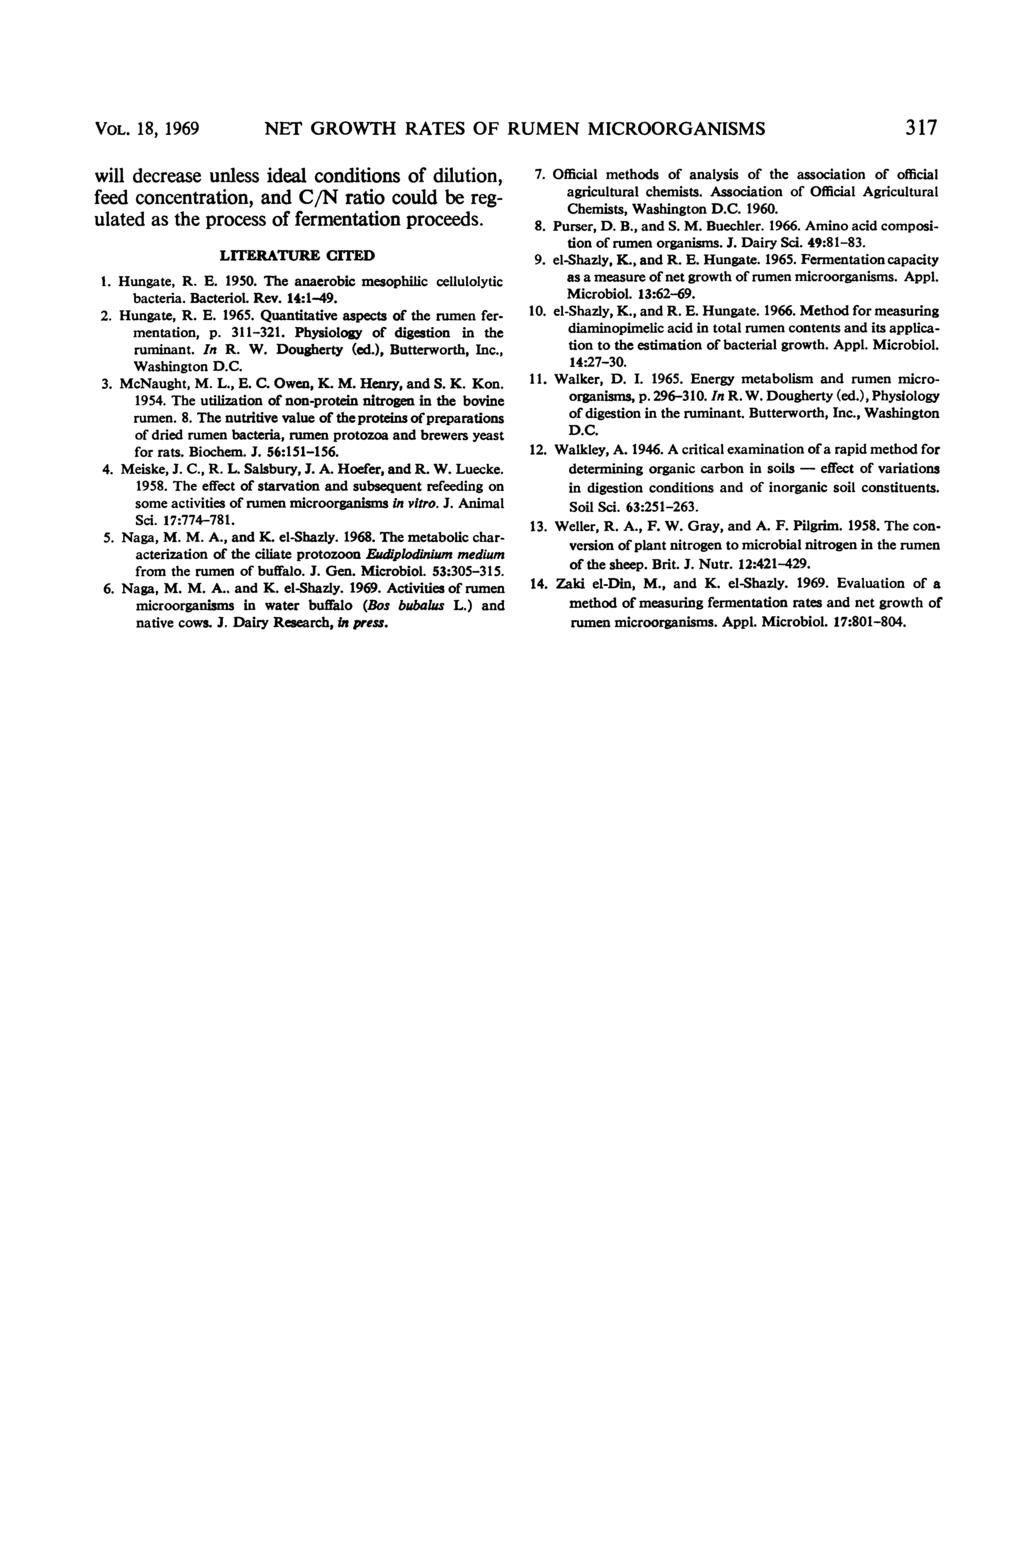 VOL. 18, 1969 NET GROWTH RATES OF RUMEN MICROORGANISMS 317 will decrease unless ideal conditions of dilution, feed concentration, and C/N ratio could be regulated as the process of fermentation